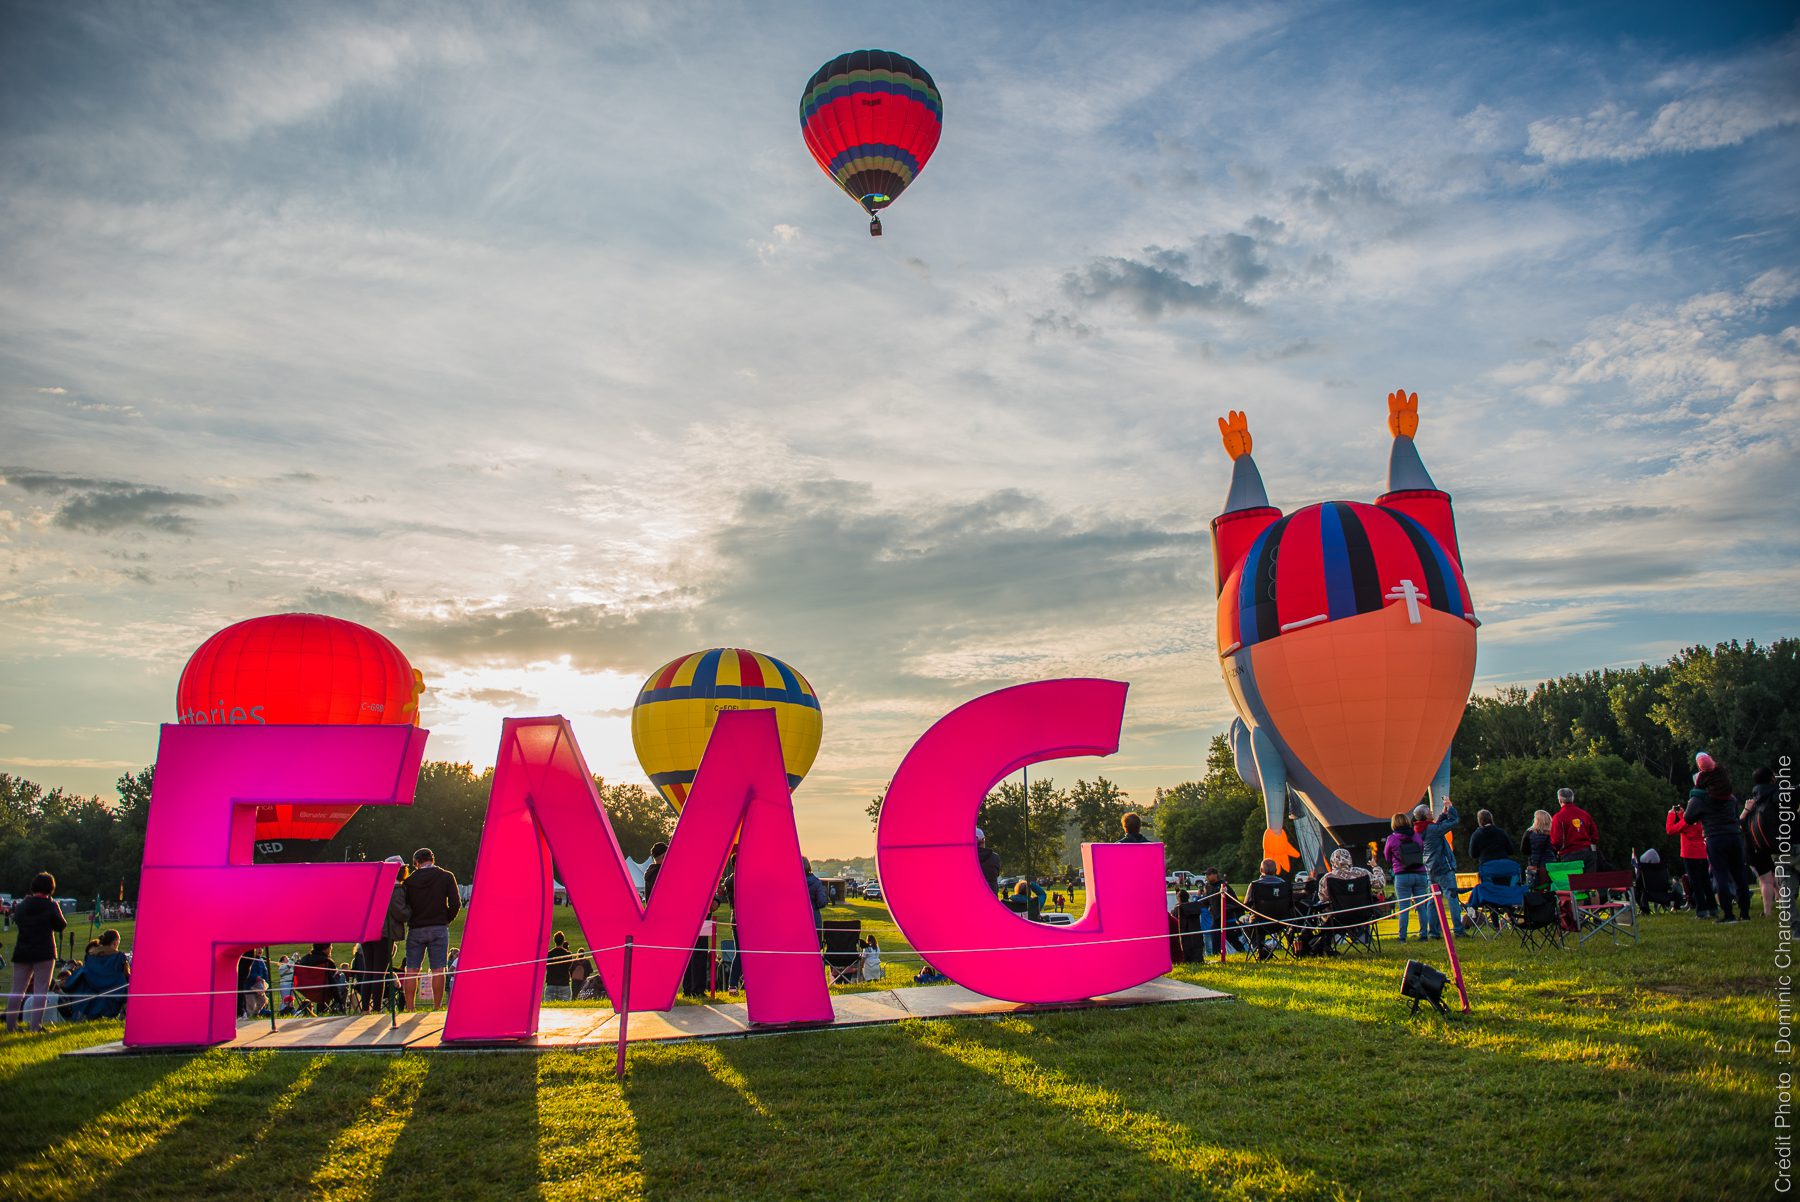 Take in the thrill of hot air flight at the Gatineau Balloon Festival!